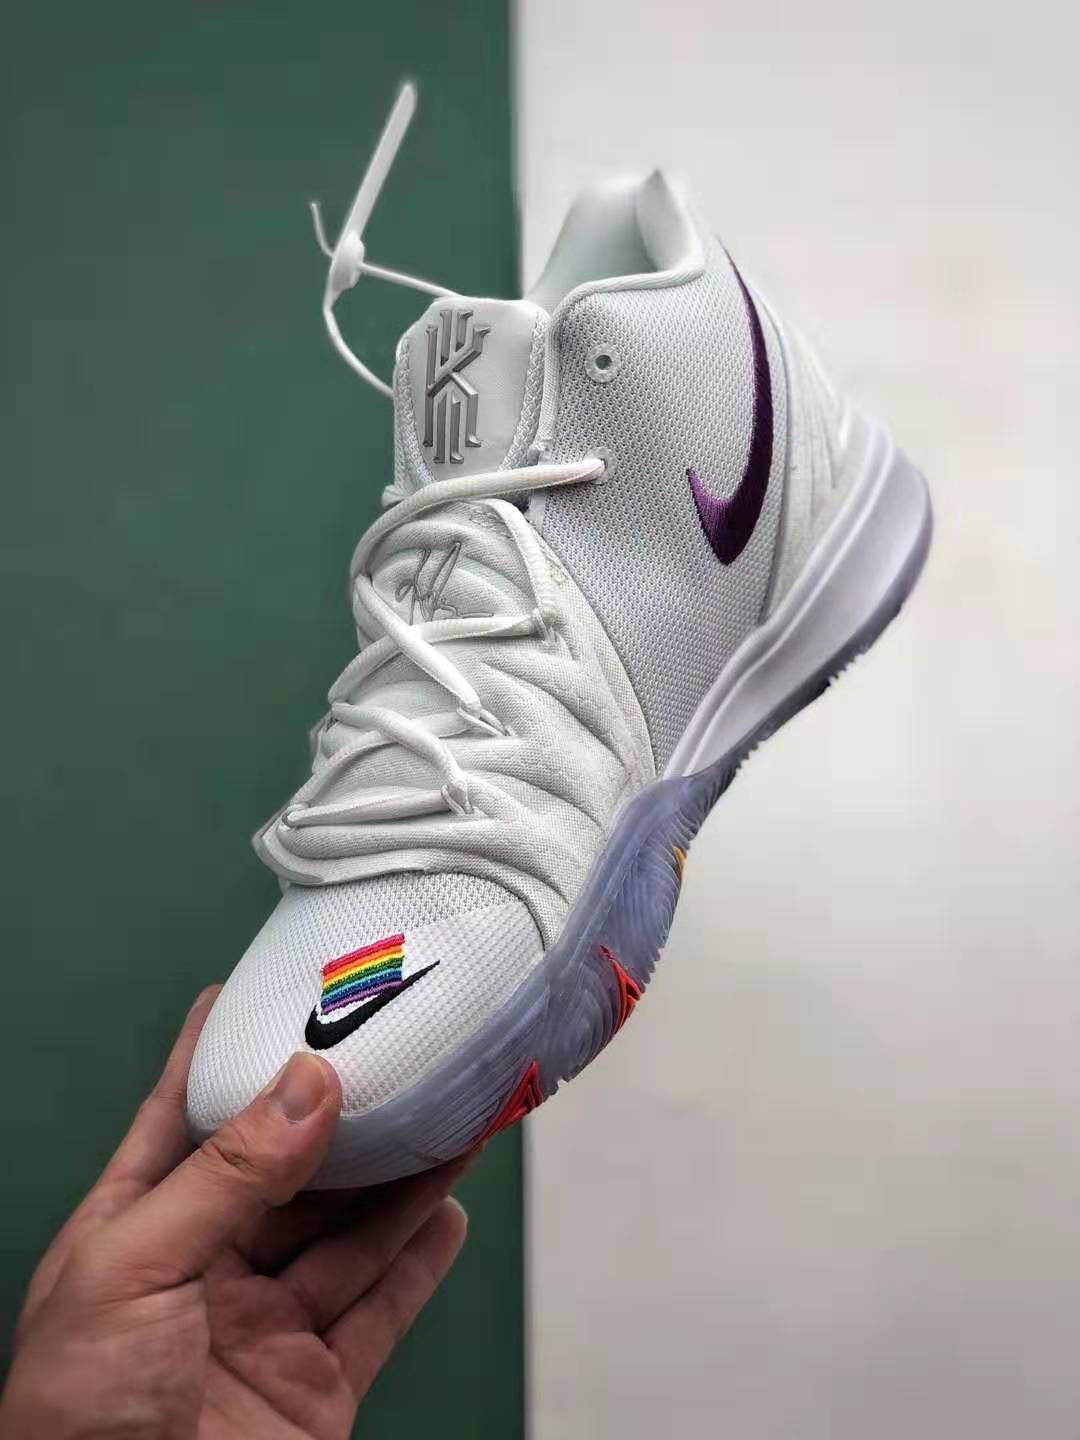 Nike Kyrie 5 BeTrue EP Rainbow Multi-Color CH0521-117 - Vibrant and Stylish Basketball Shoes